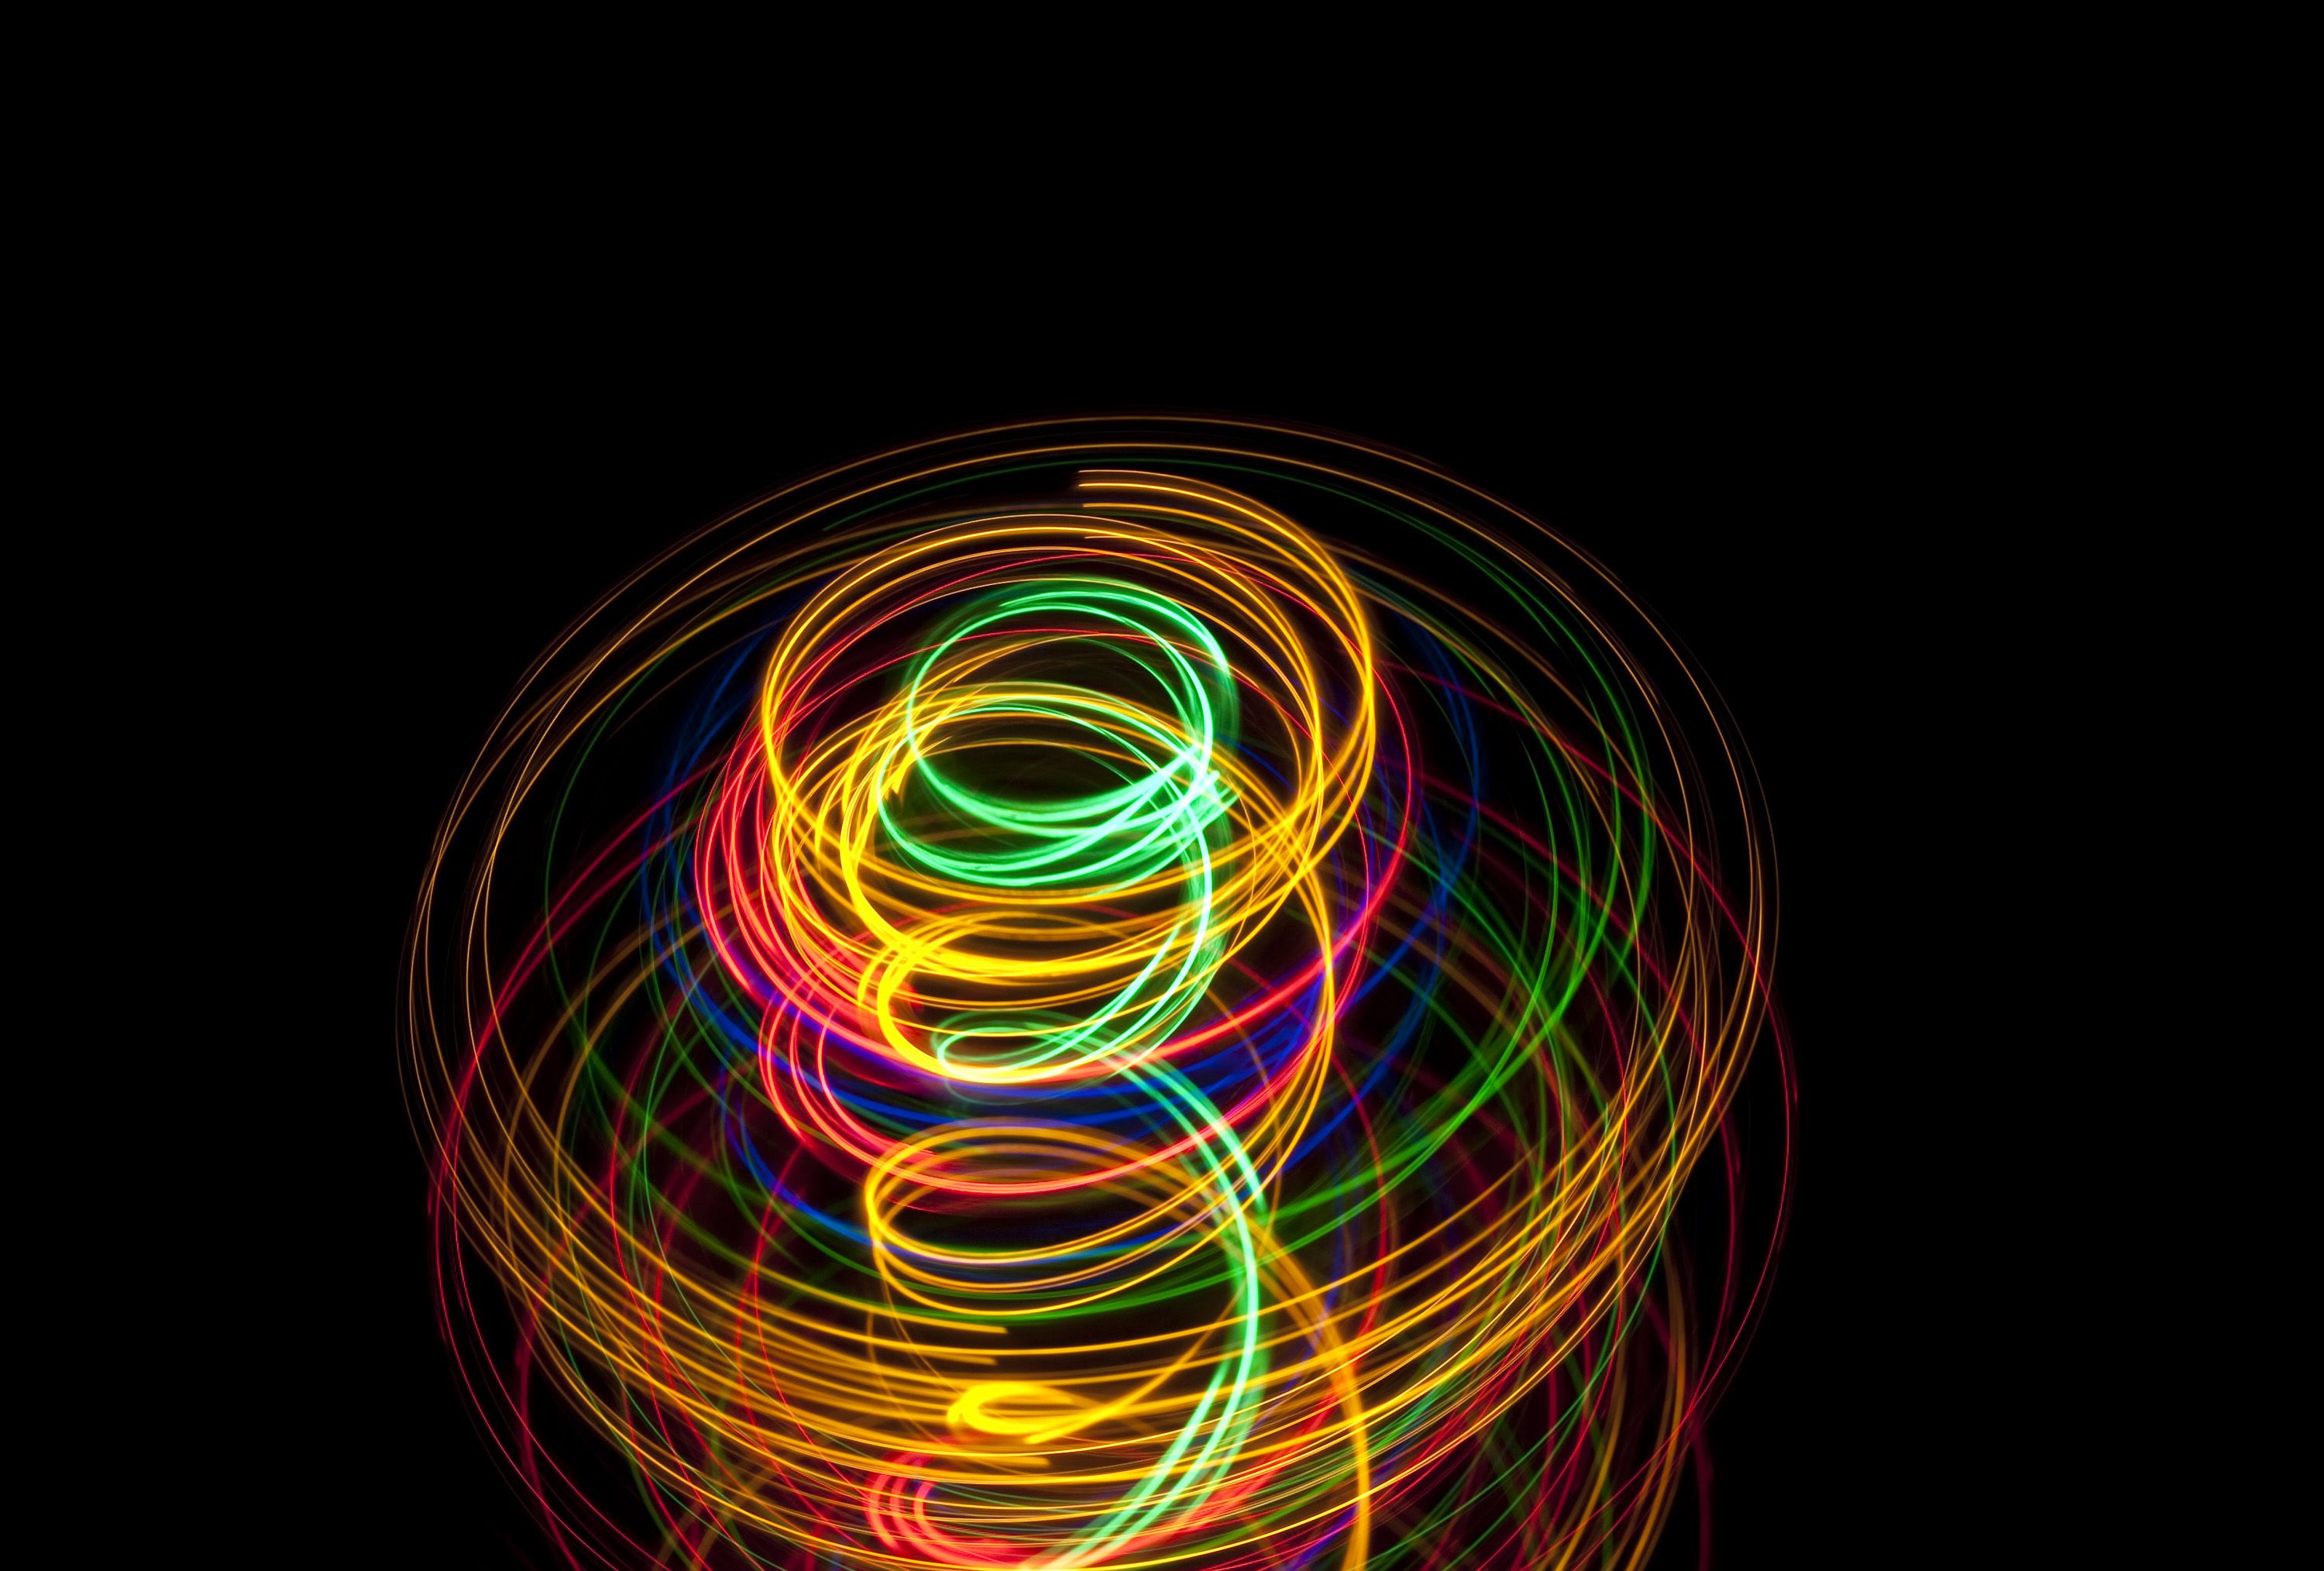 vivid spiral. Free background and textures